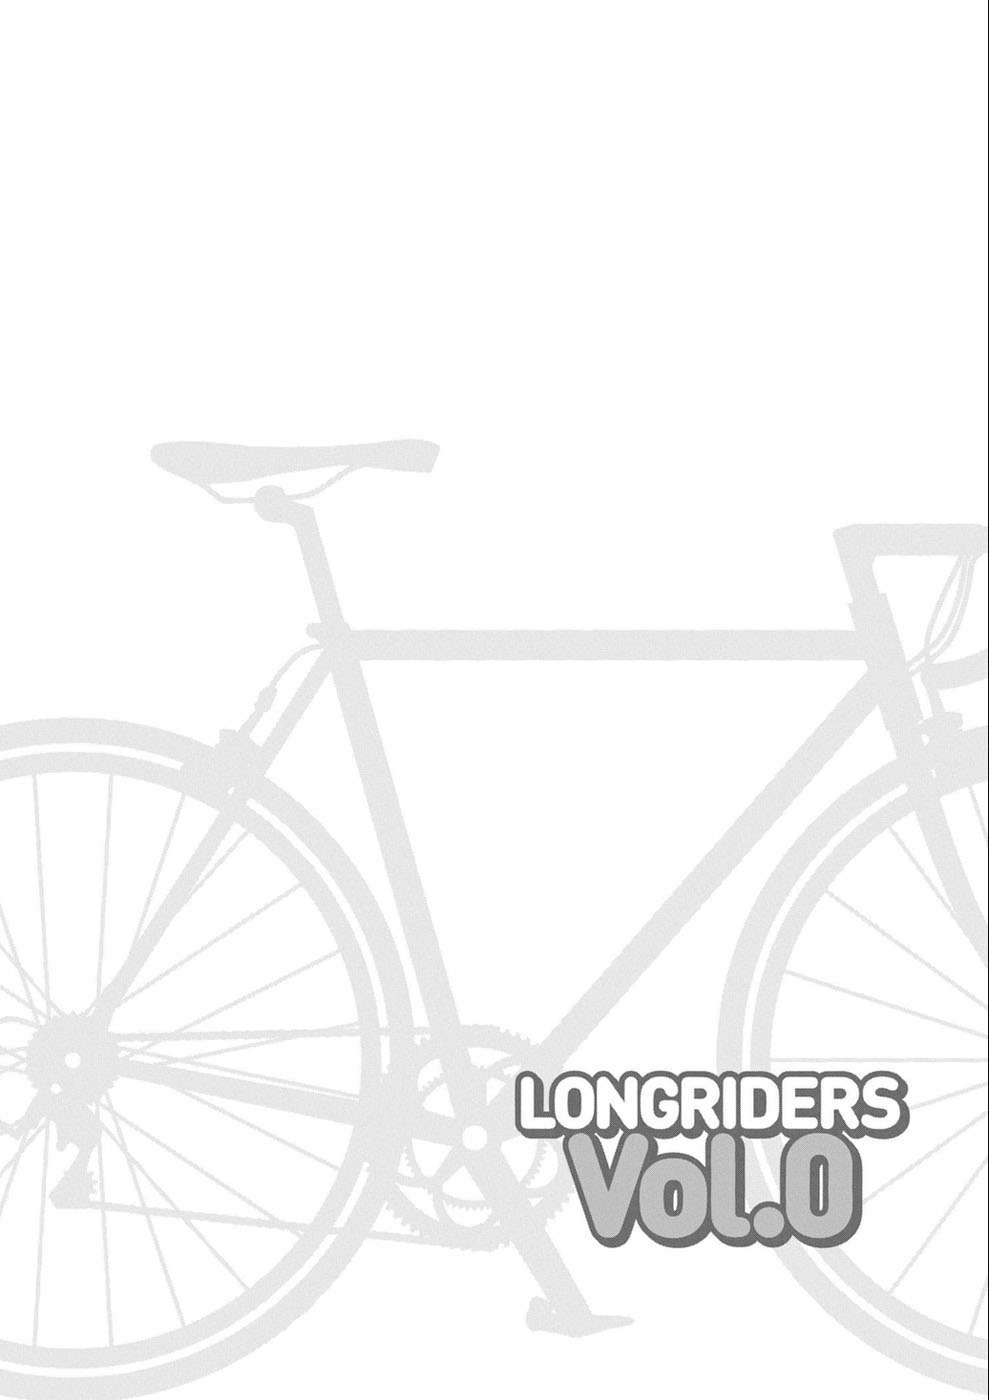 Long Riders! - chapter 22.6 - #2